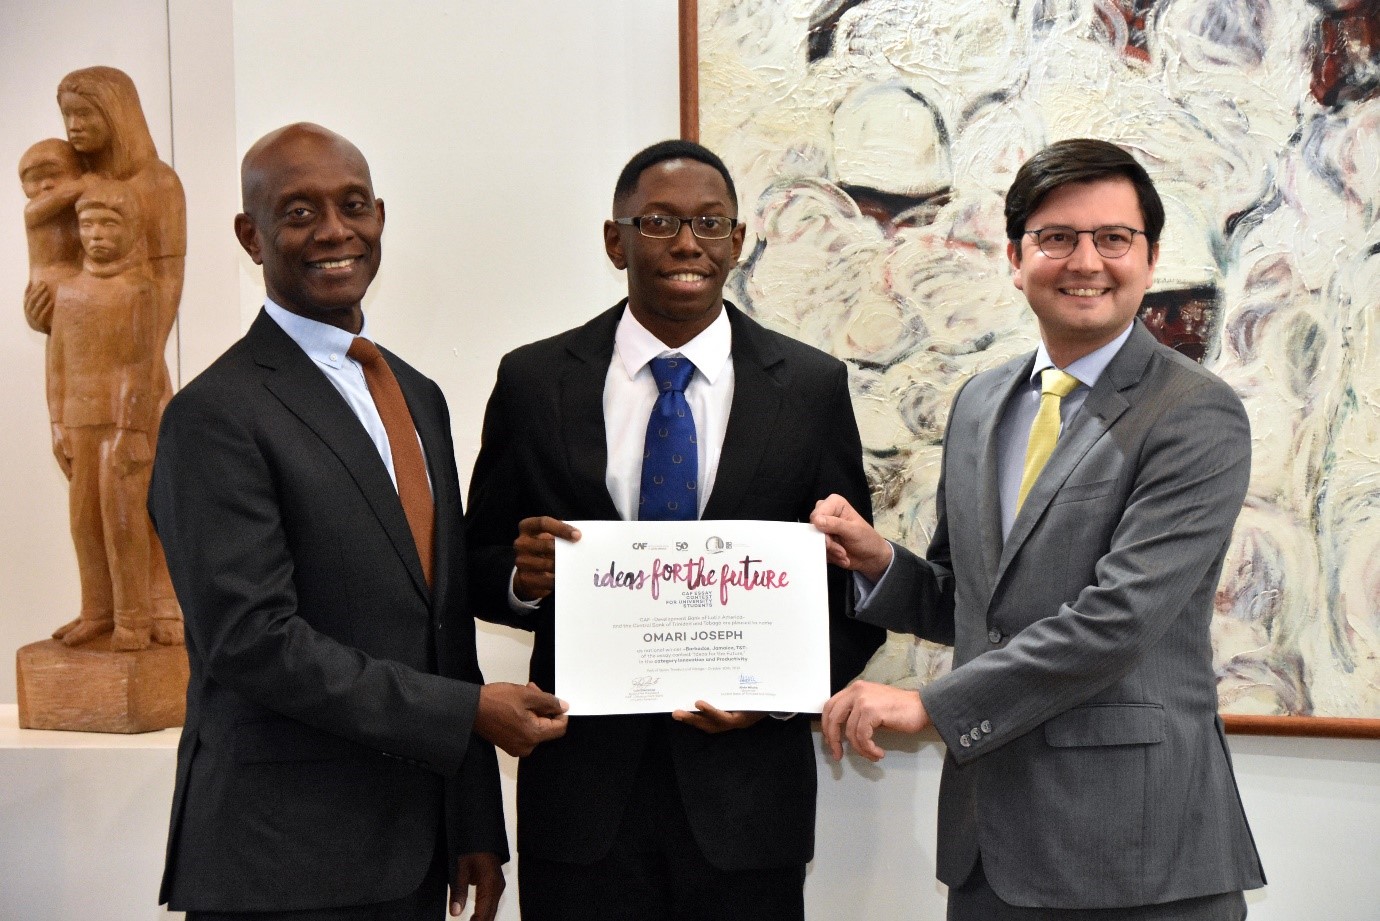  A student from The University of the West Indies wins CAF´s Essay Contest #IdeasForTheFuture